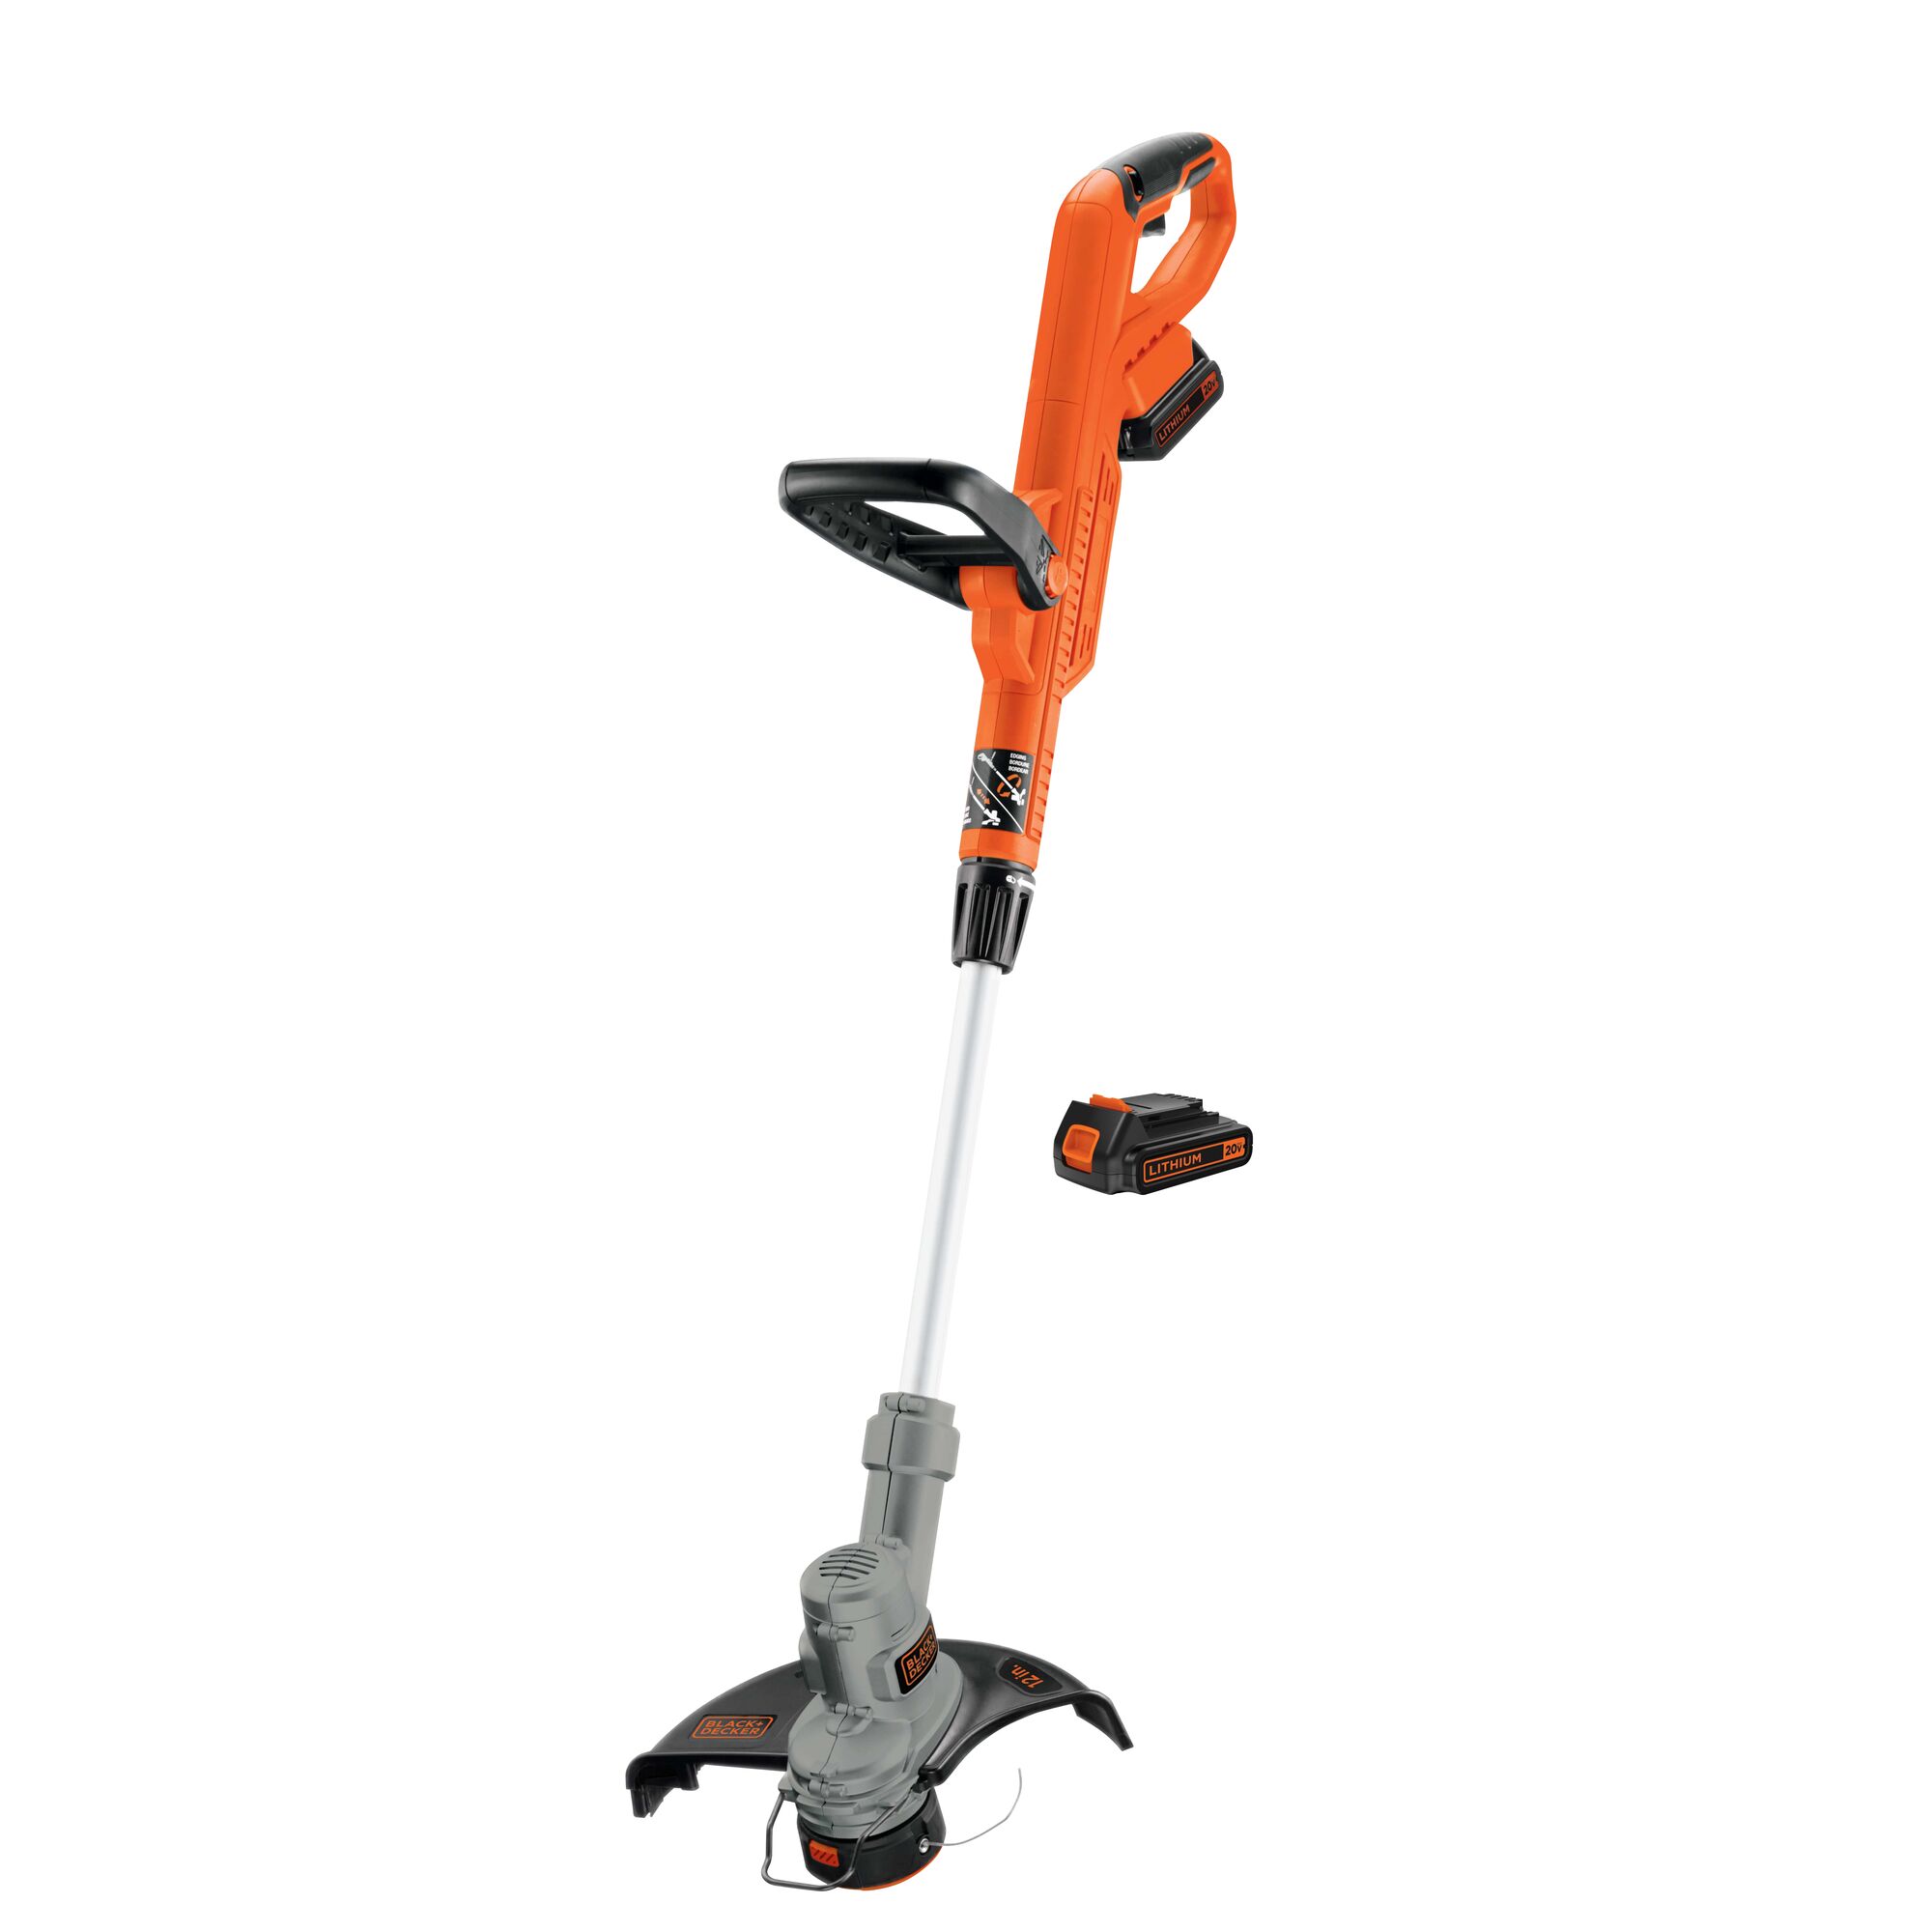 Profile of 20V Max Lithium Trimmer/Edger, 12 In. with battery.